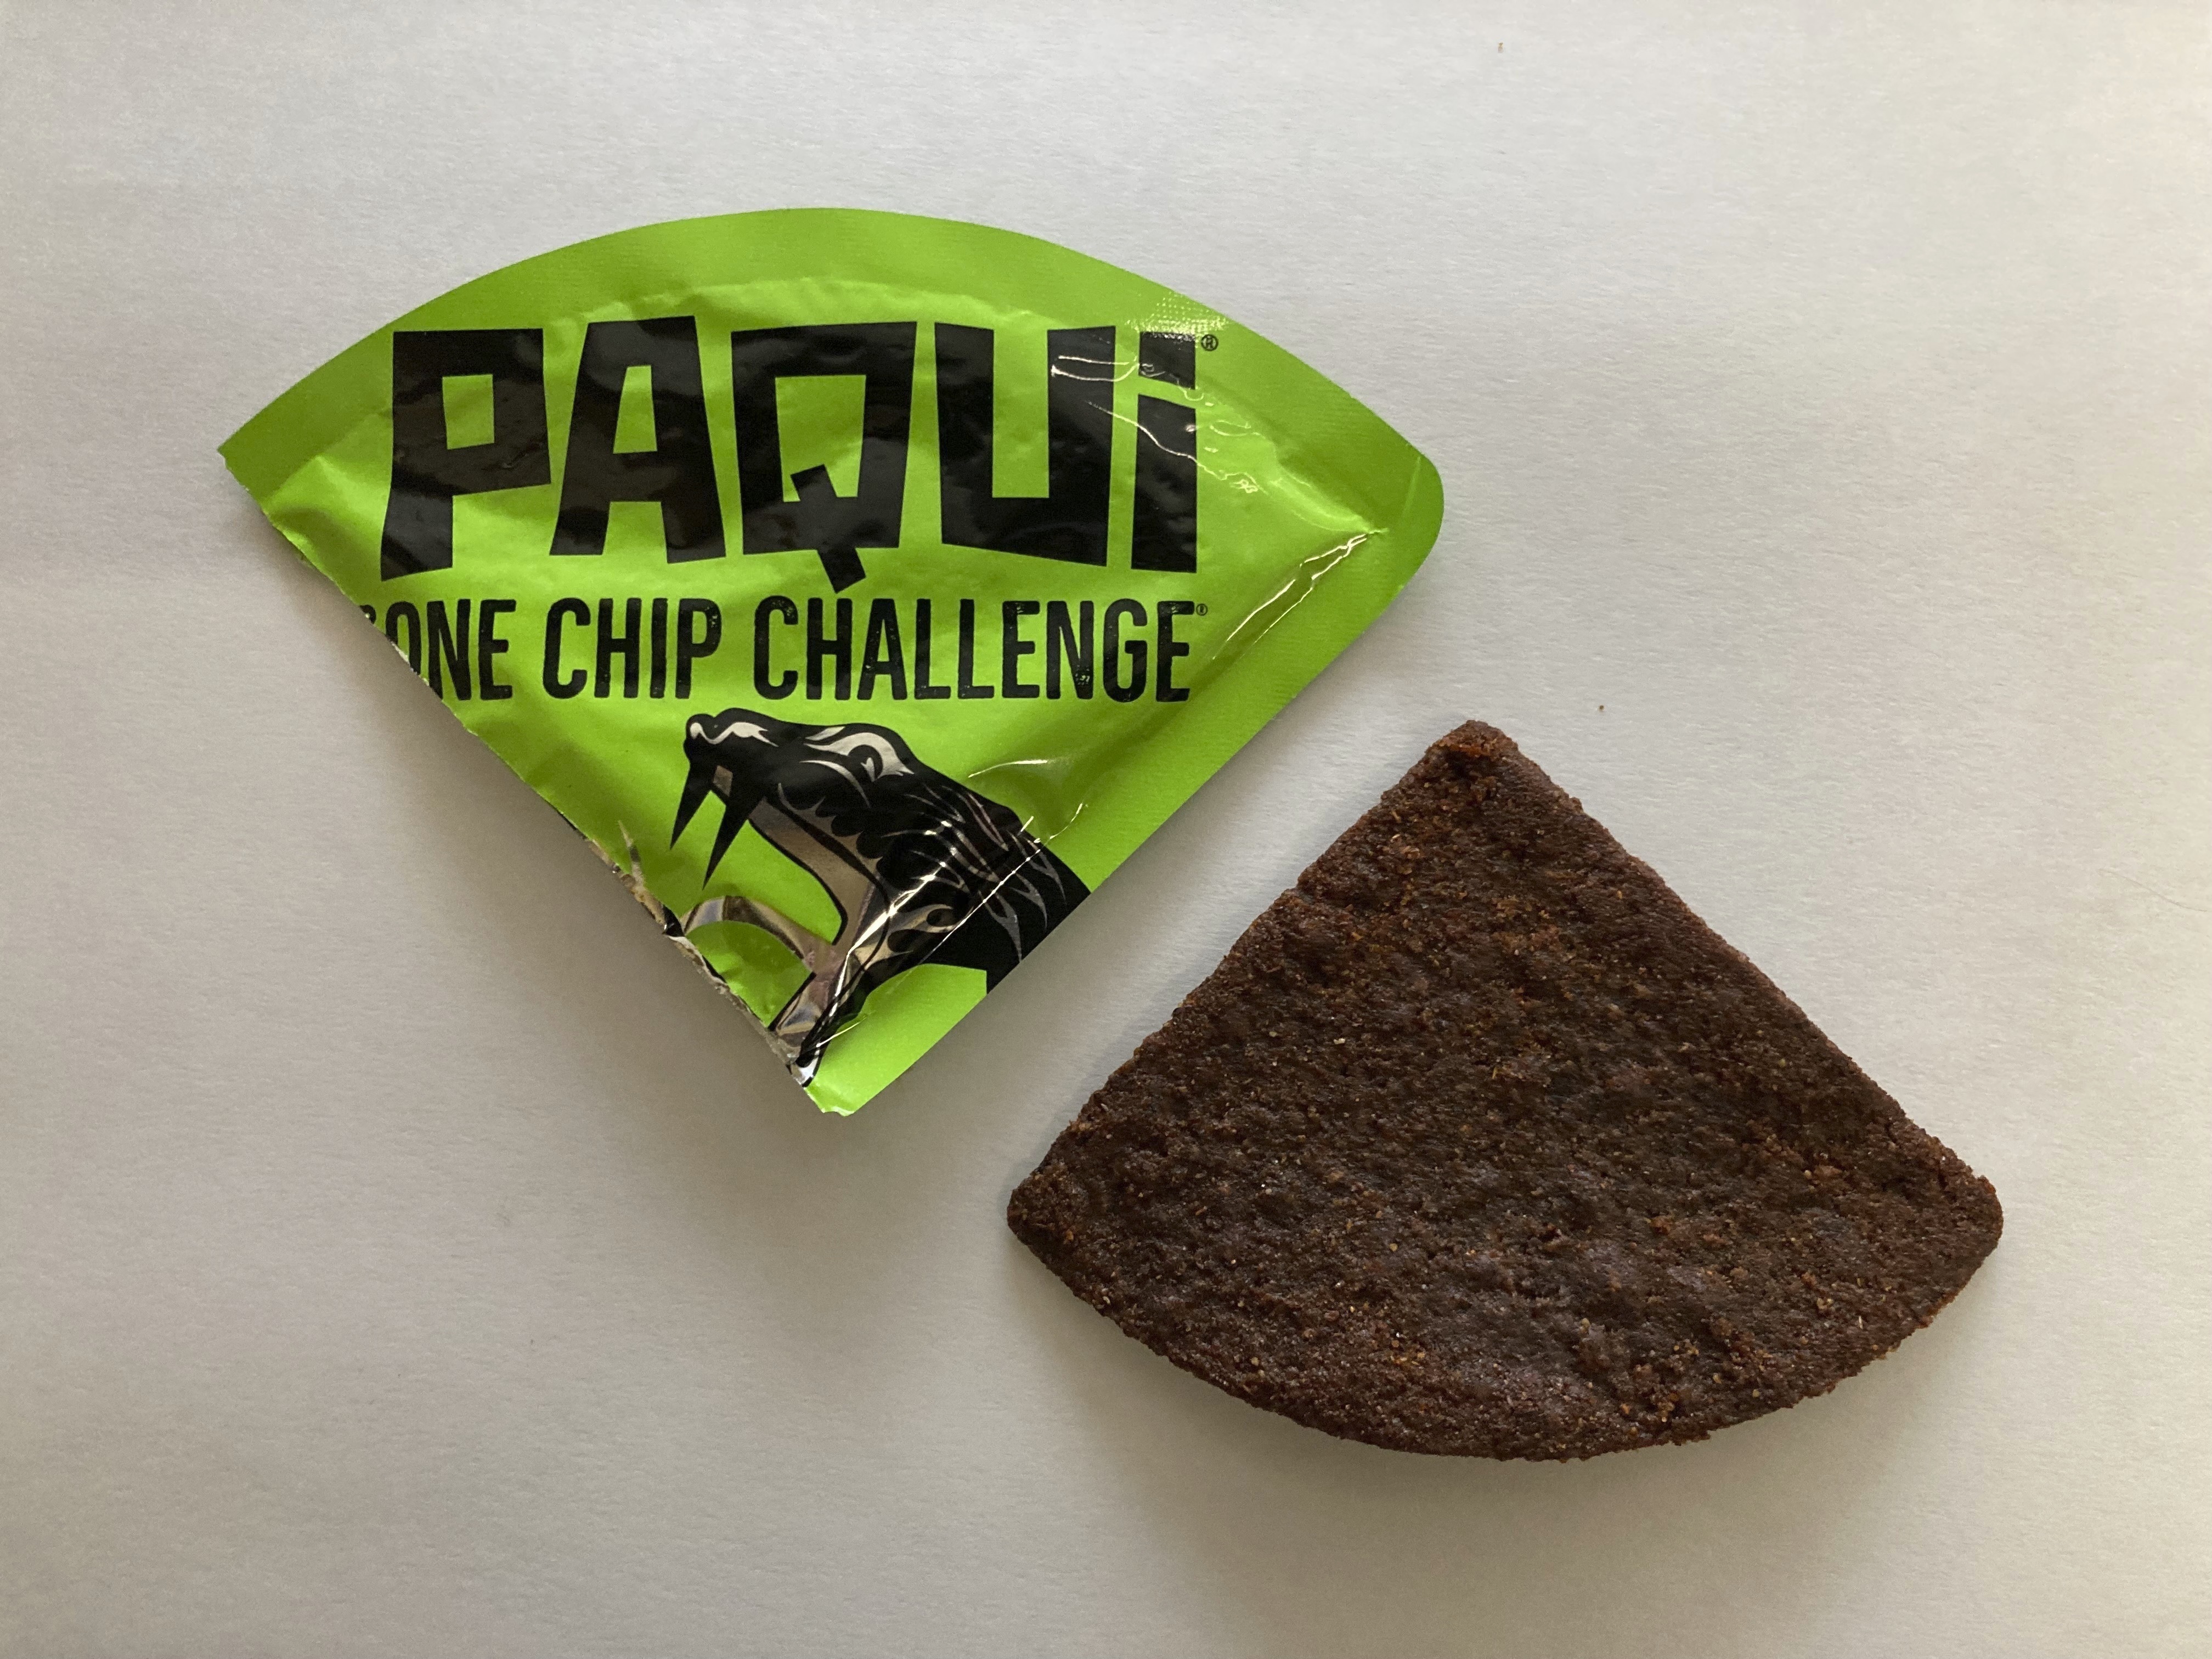 Hershey-owned Paqui pulls #OneChipChallenge spicy chip amid health concerns